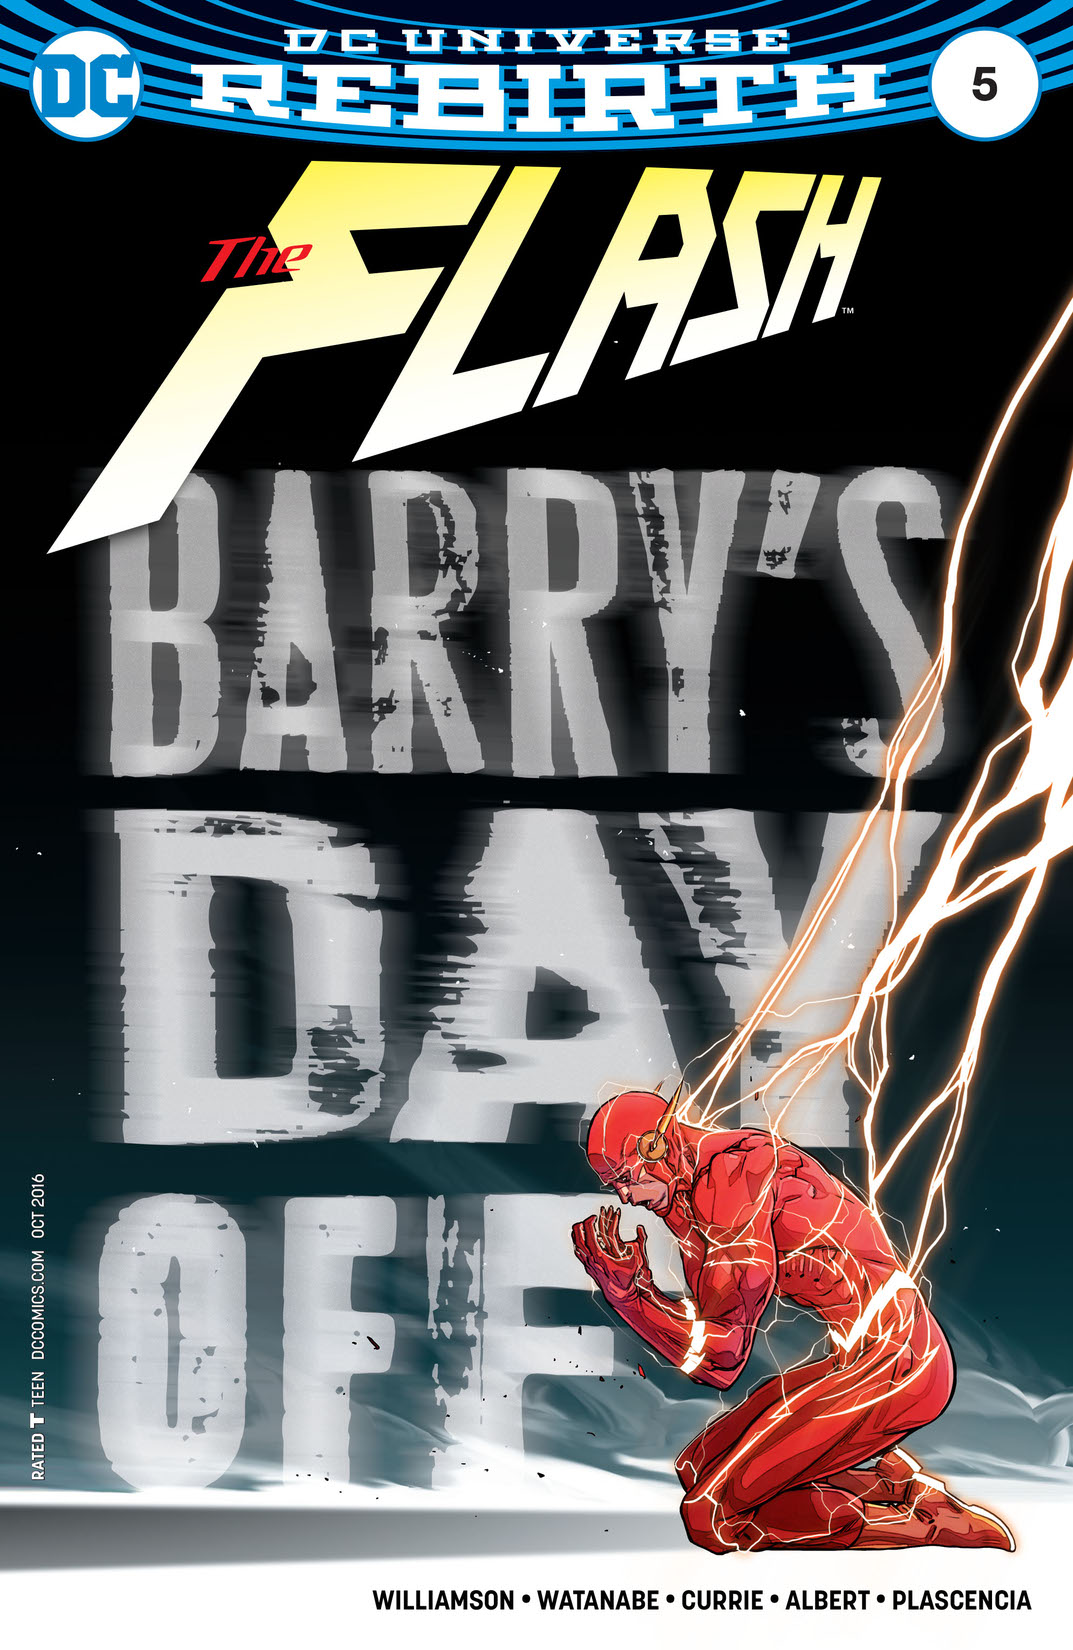 The Flash (2016-) #5 preview images